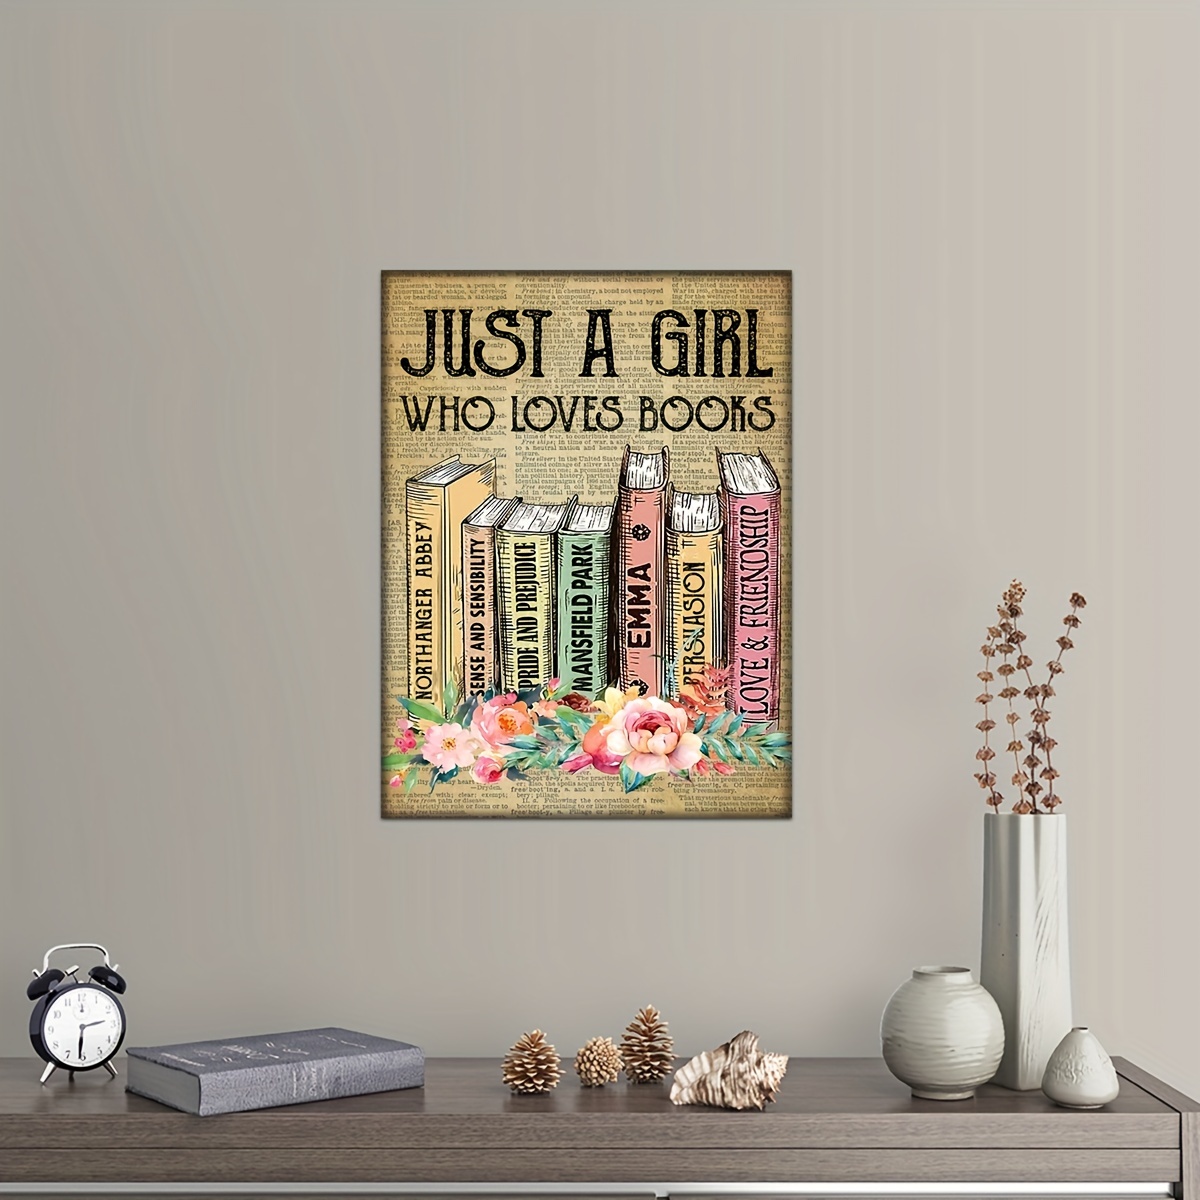 I LOVE BOOKS - Book Lovers Gifts - Posters and Art Prints